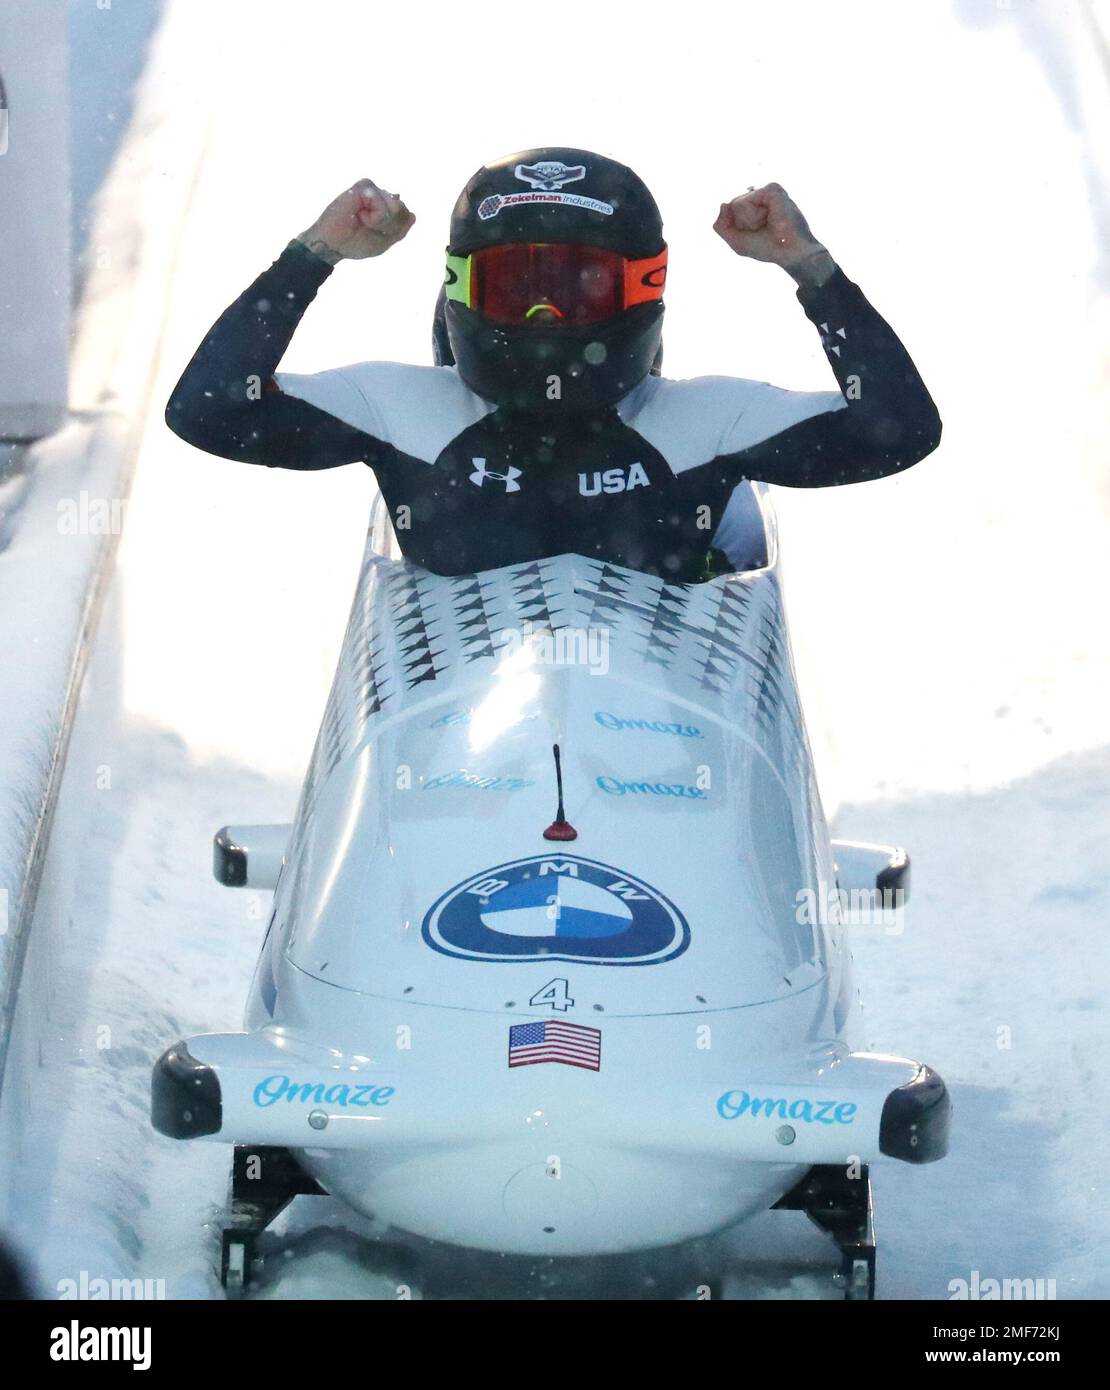 Kaillie Humphries and Lolo Jones of the United States celebrate after winning the two womens bobsleigh race at the Bobsleigh and Skeleton World Championships in Altenberg, Germany, Saturday, Feb